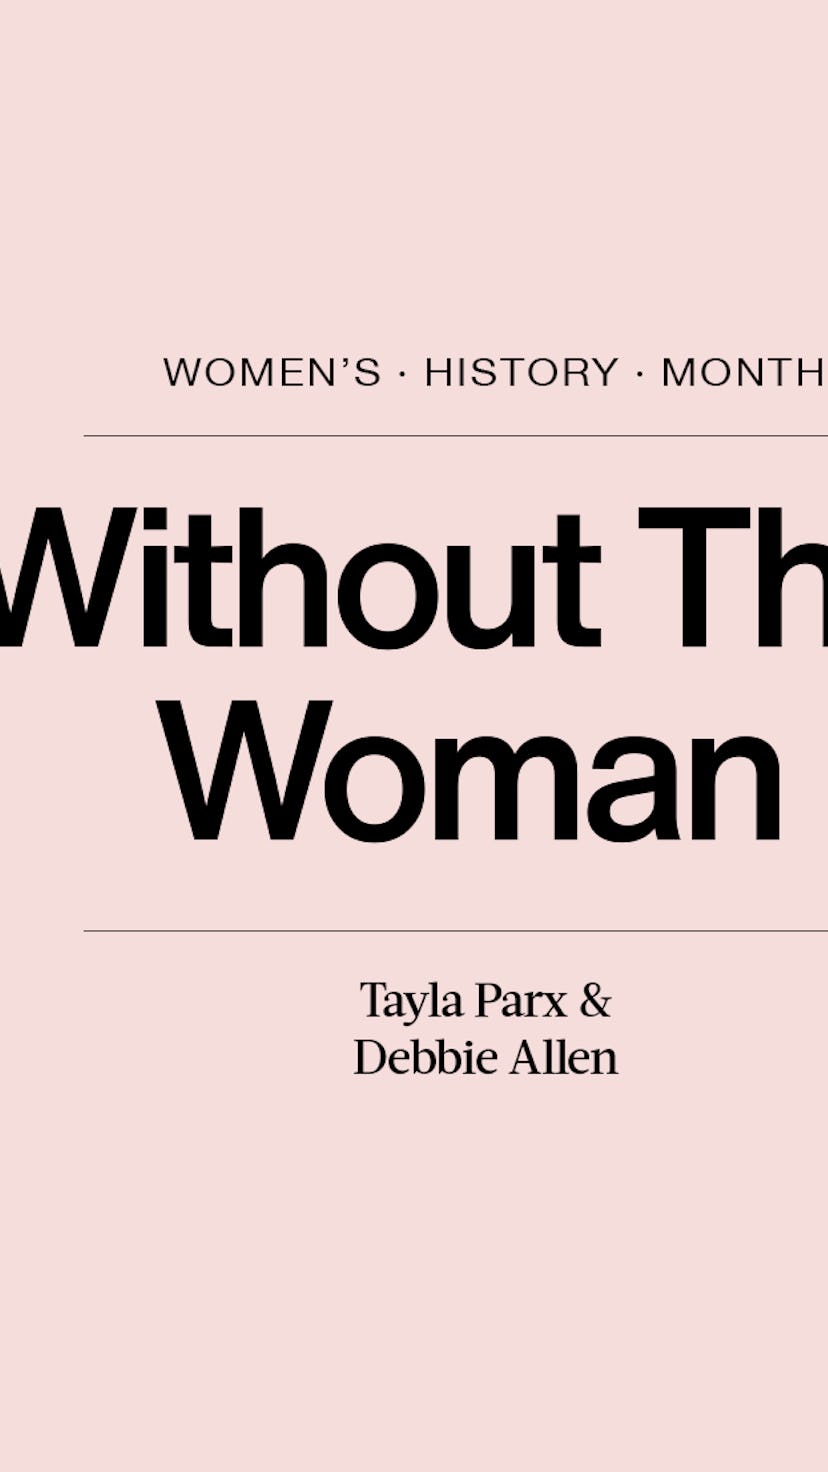 "Without this woman" text between Debbie Allen and Tayla Parx photos